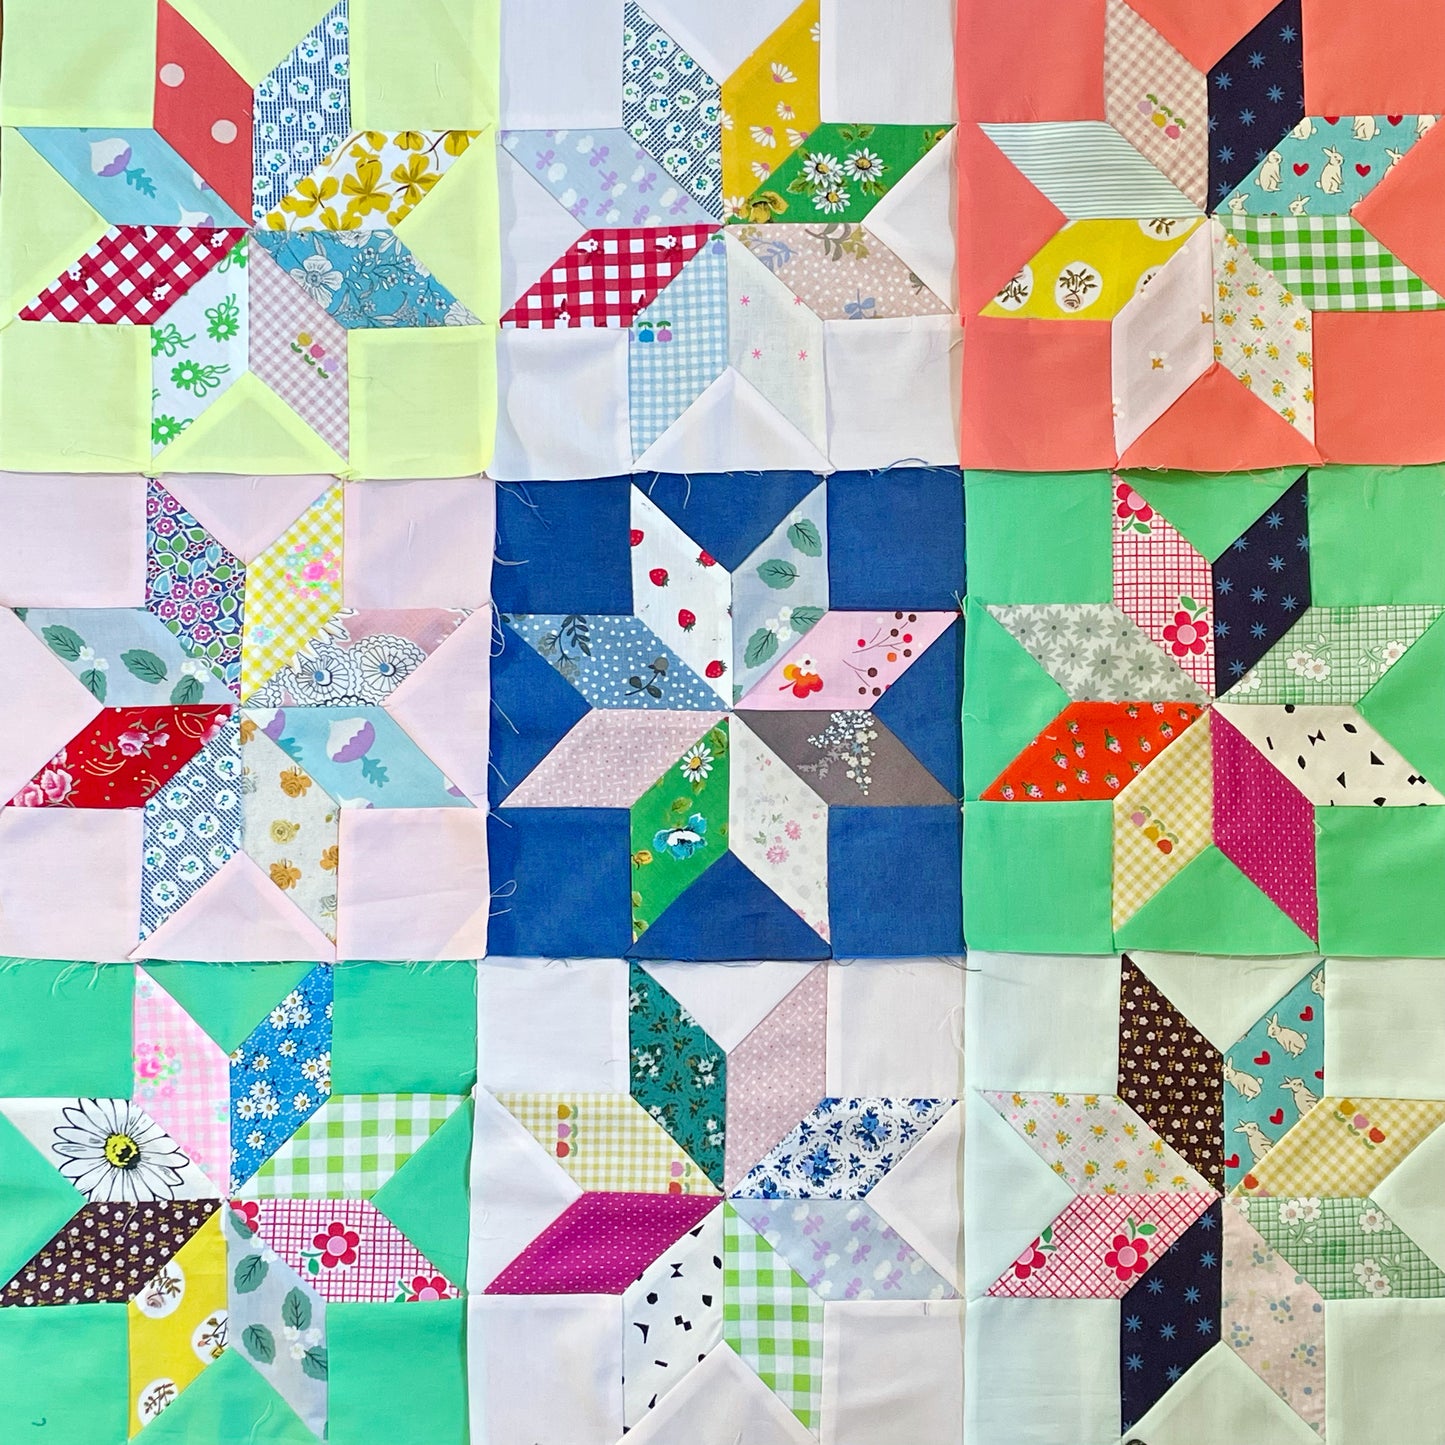 Vintage Stars Quilt Pattern by Everyday Quilts